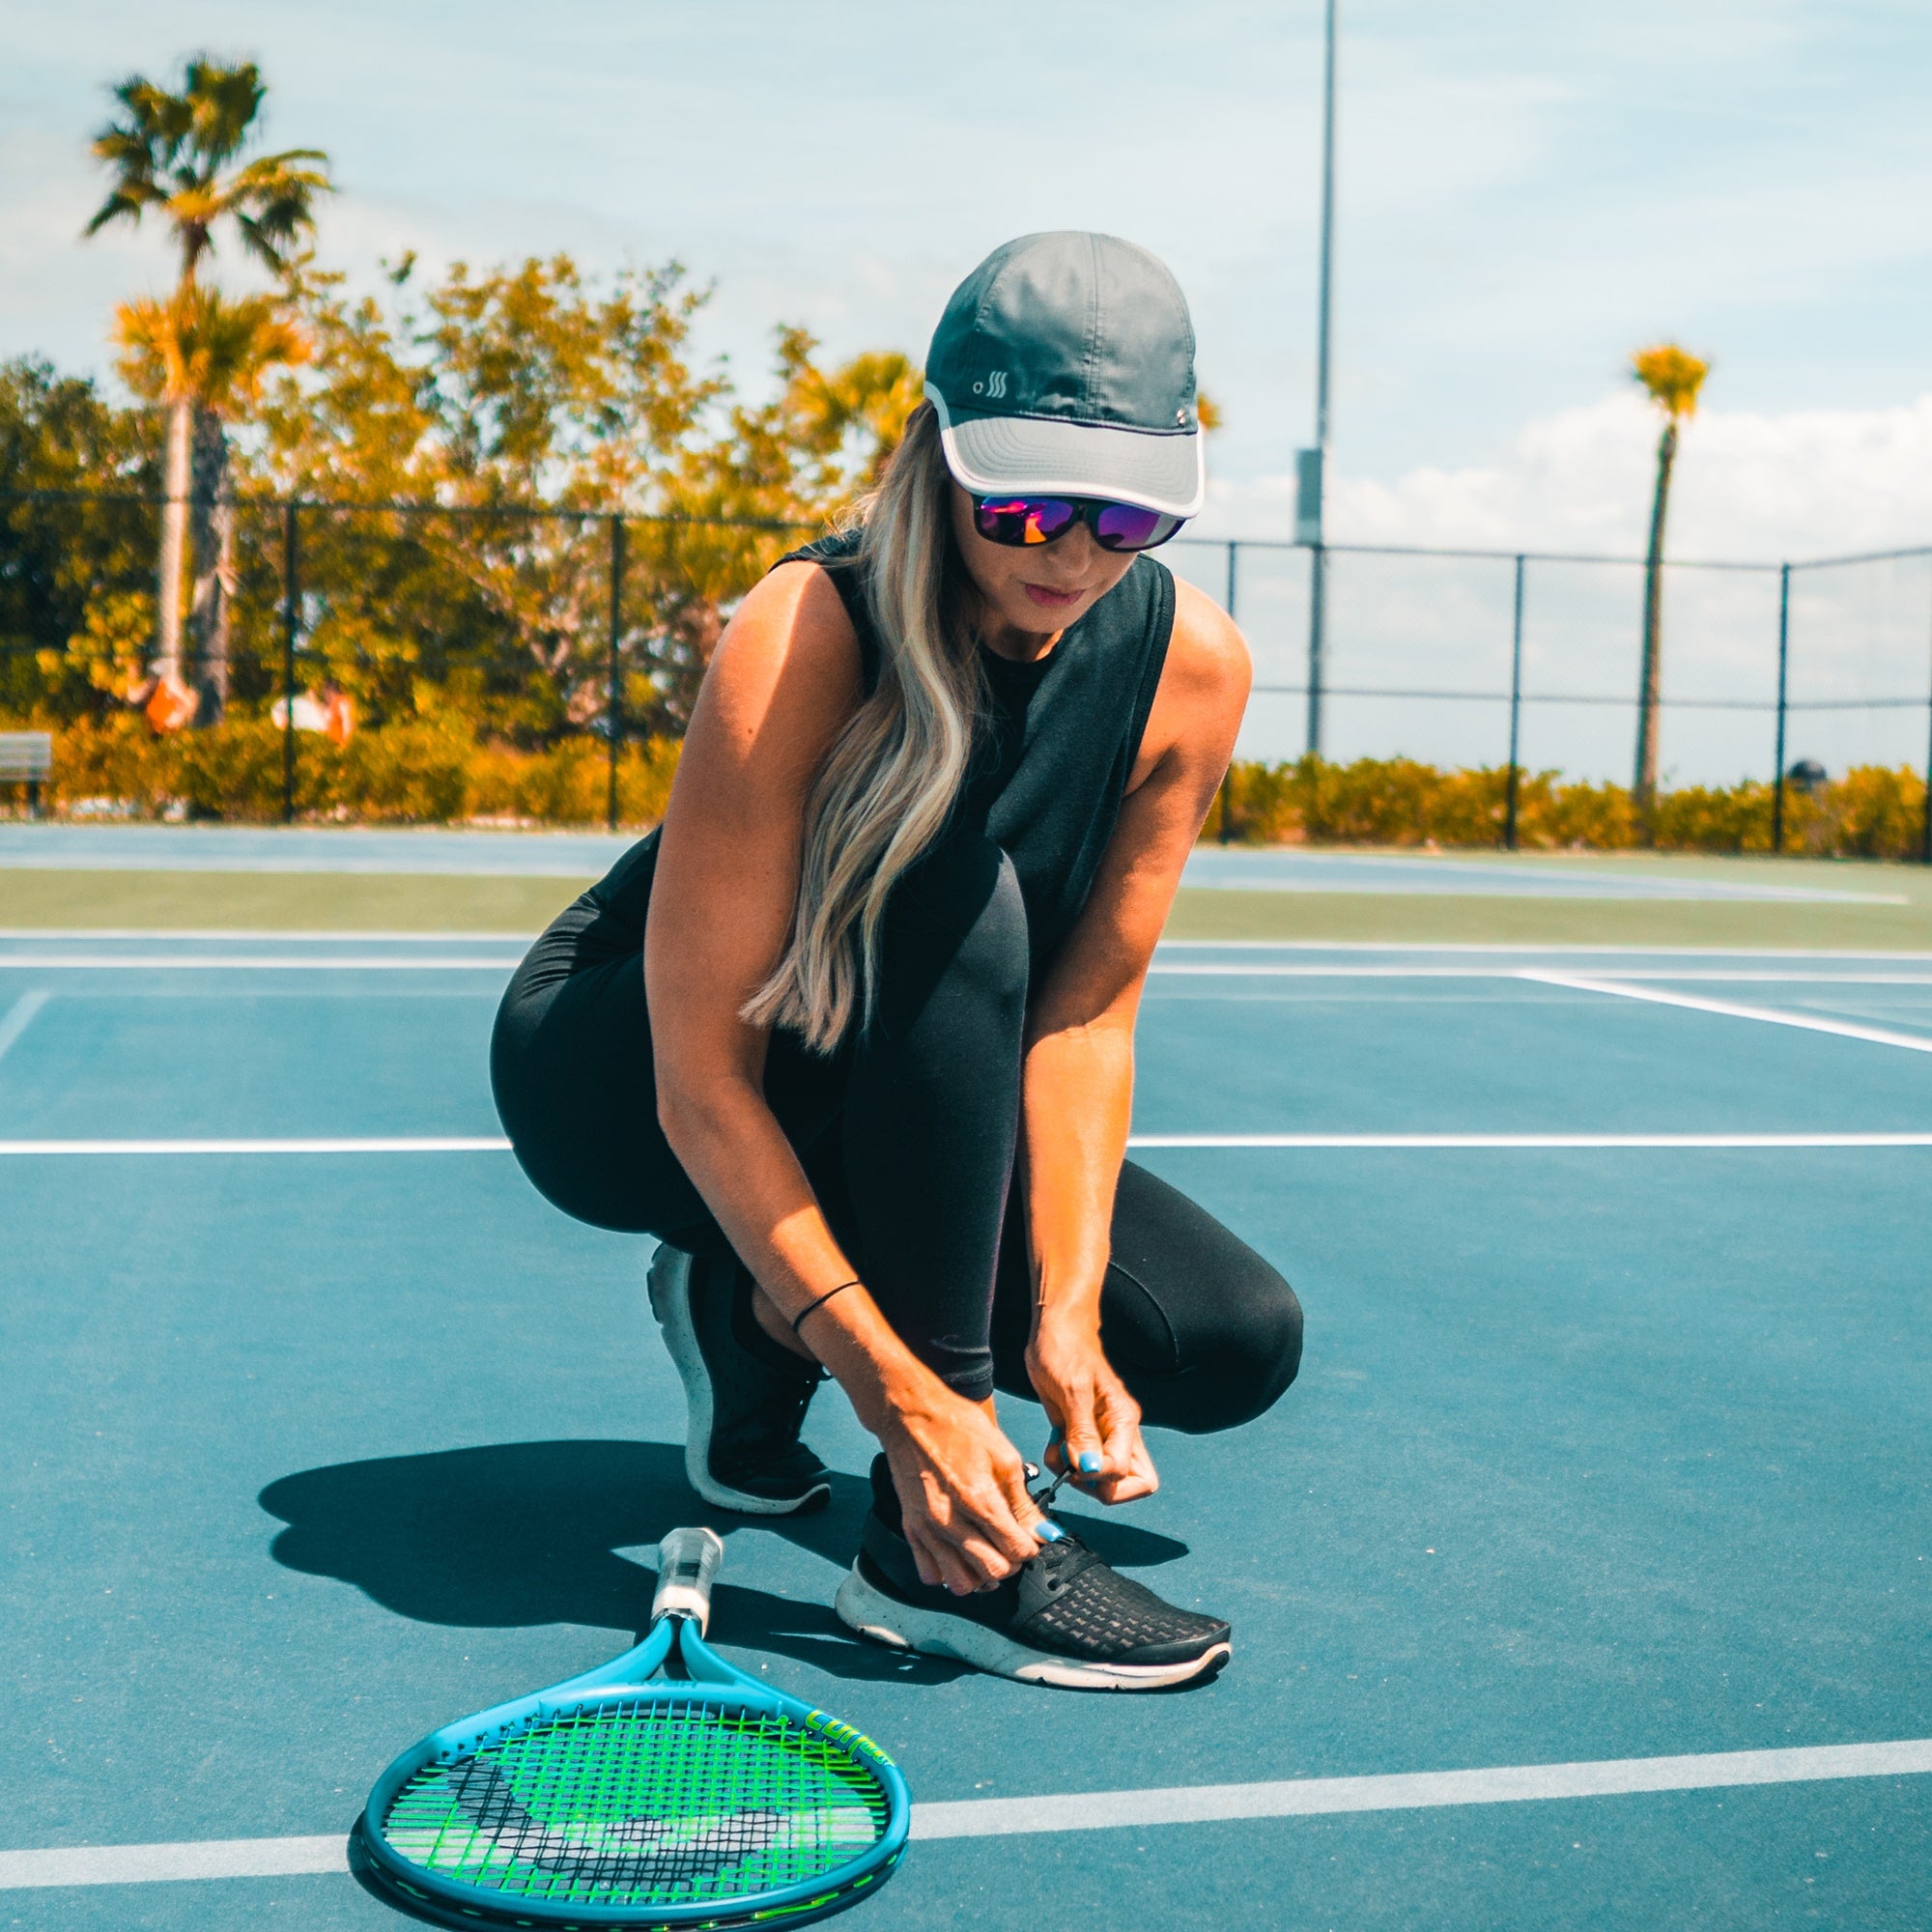 Women playing tennis while wearing a moisture wicking hat